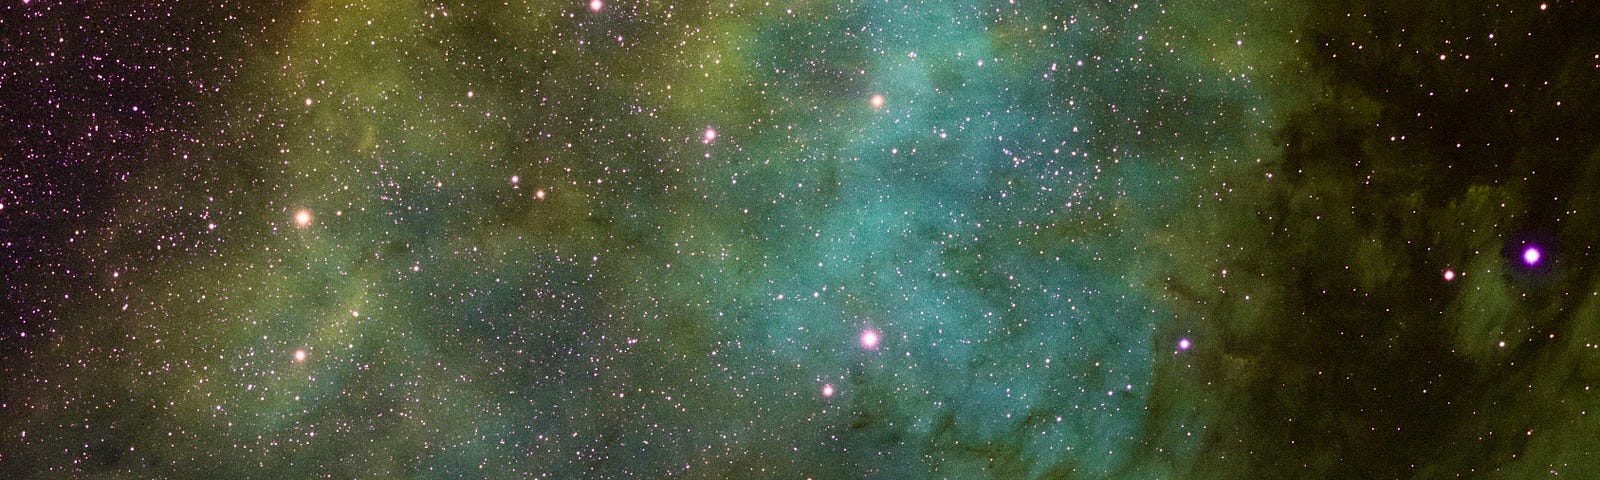 Image: a green-blue nebula, edged with yellow, blooming in deep space among multicoloured stars.